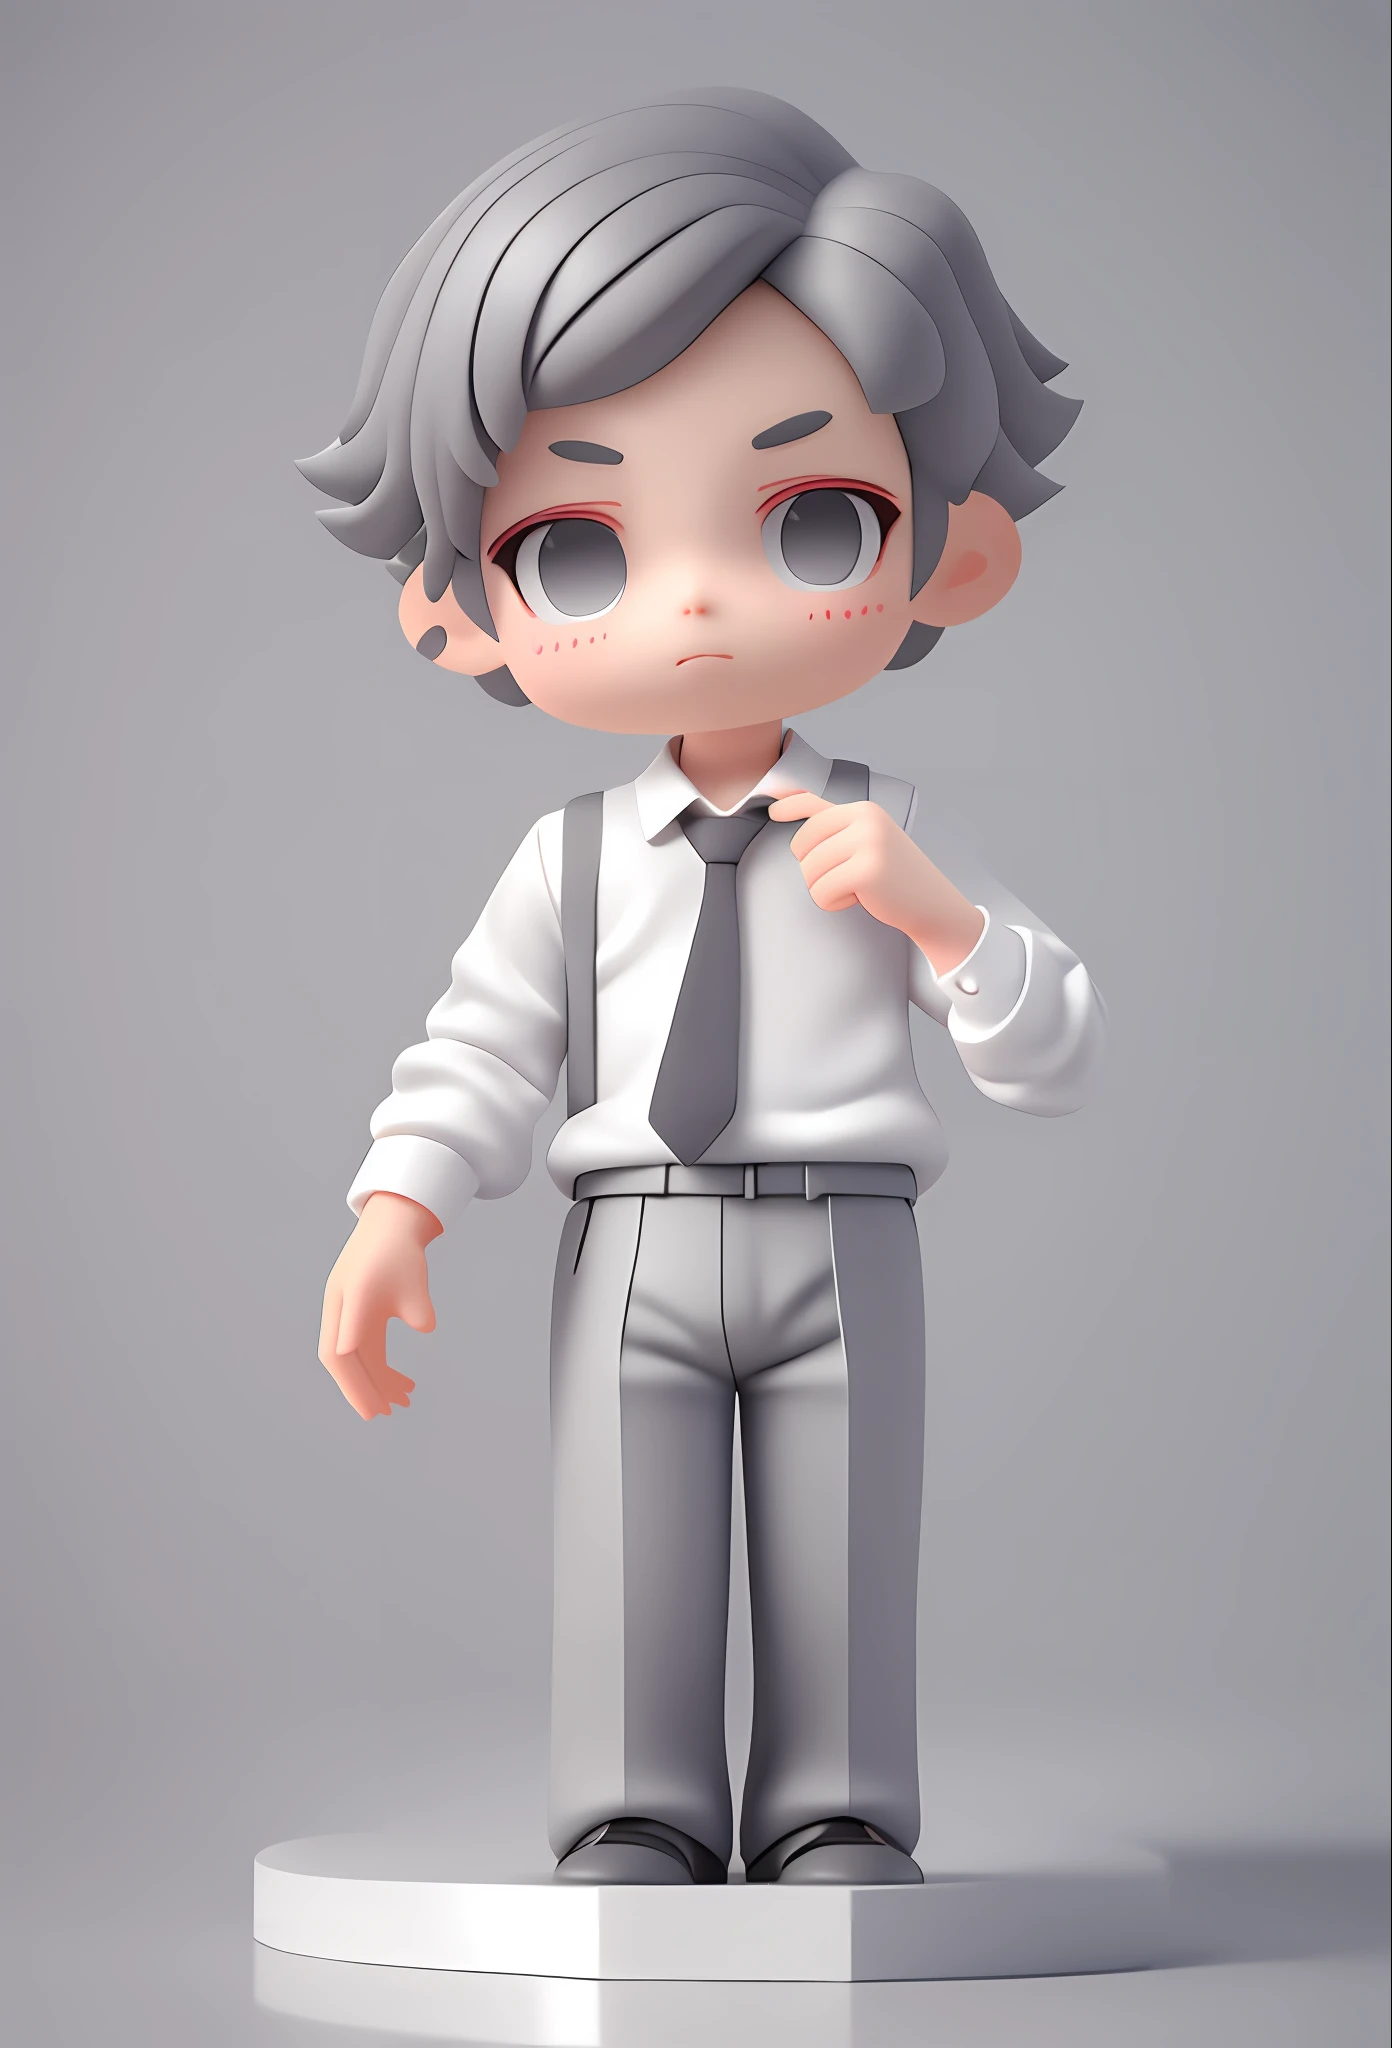 Blind box 3D design, cute boy wearing white shirt with gray suit in hand, gray suit pants, cute 3d rendering, portrait anime, cute 3d anime boy rendering, cute detailed digital art, 3d rendering stylized, 3d rendered character art 8k, cute digital painting, anime style 3d, super detailed rendering